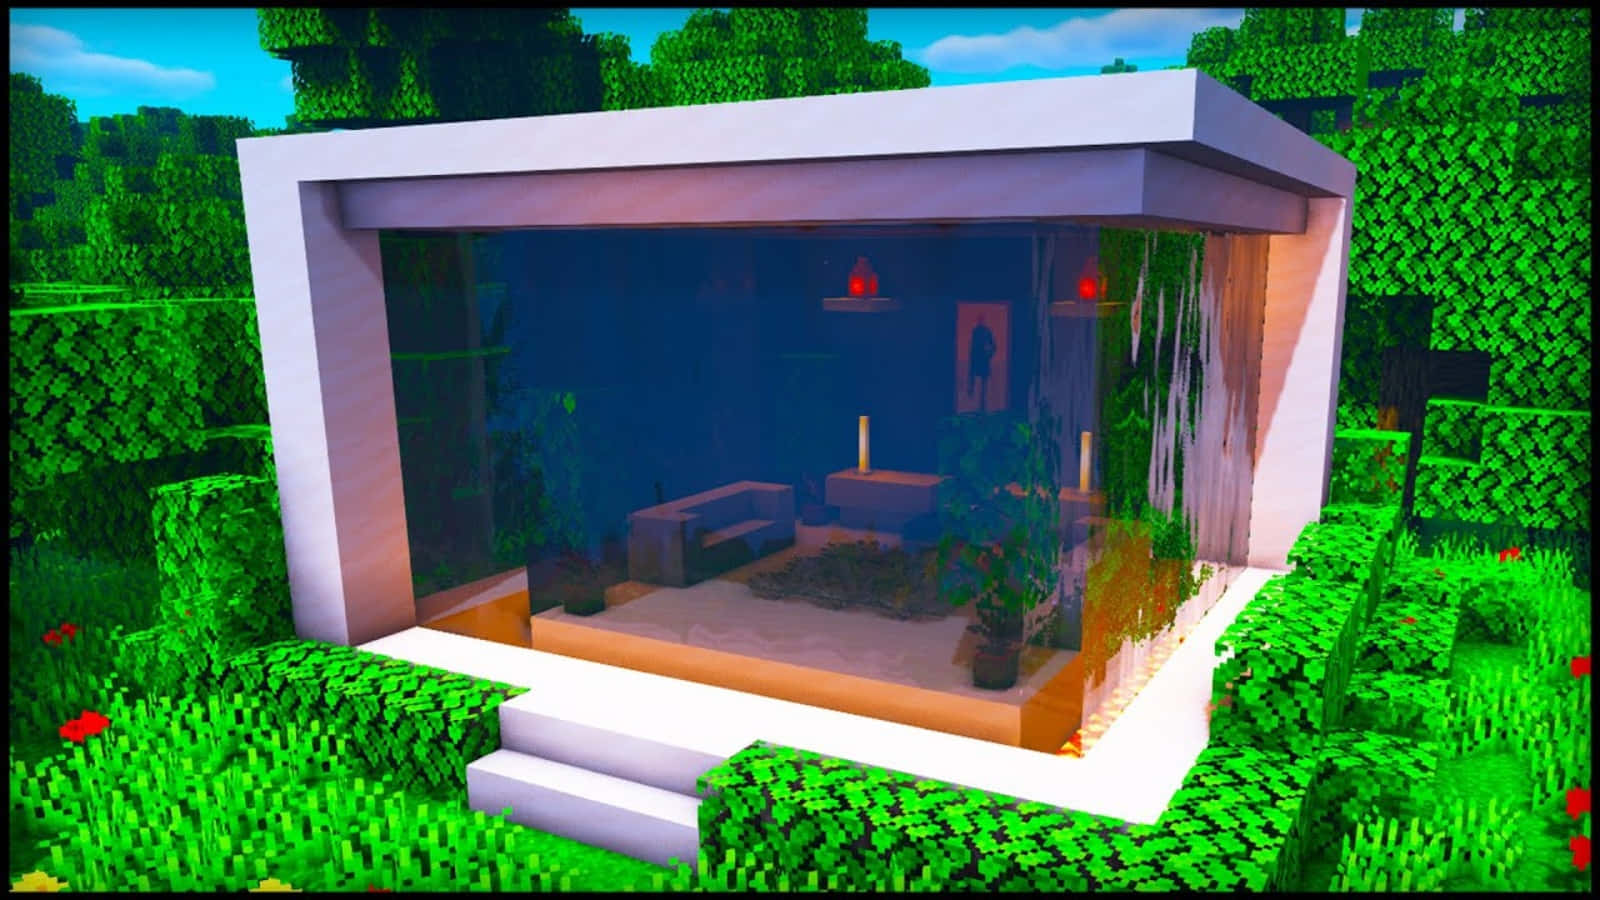 A Small House In Minecraft With A Glass Window